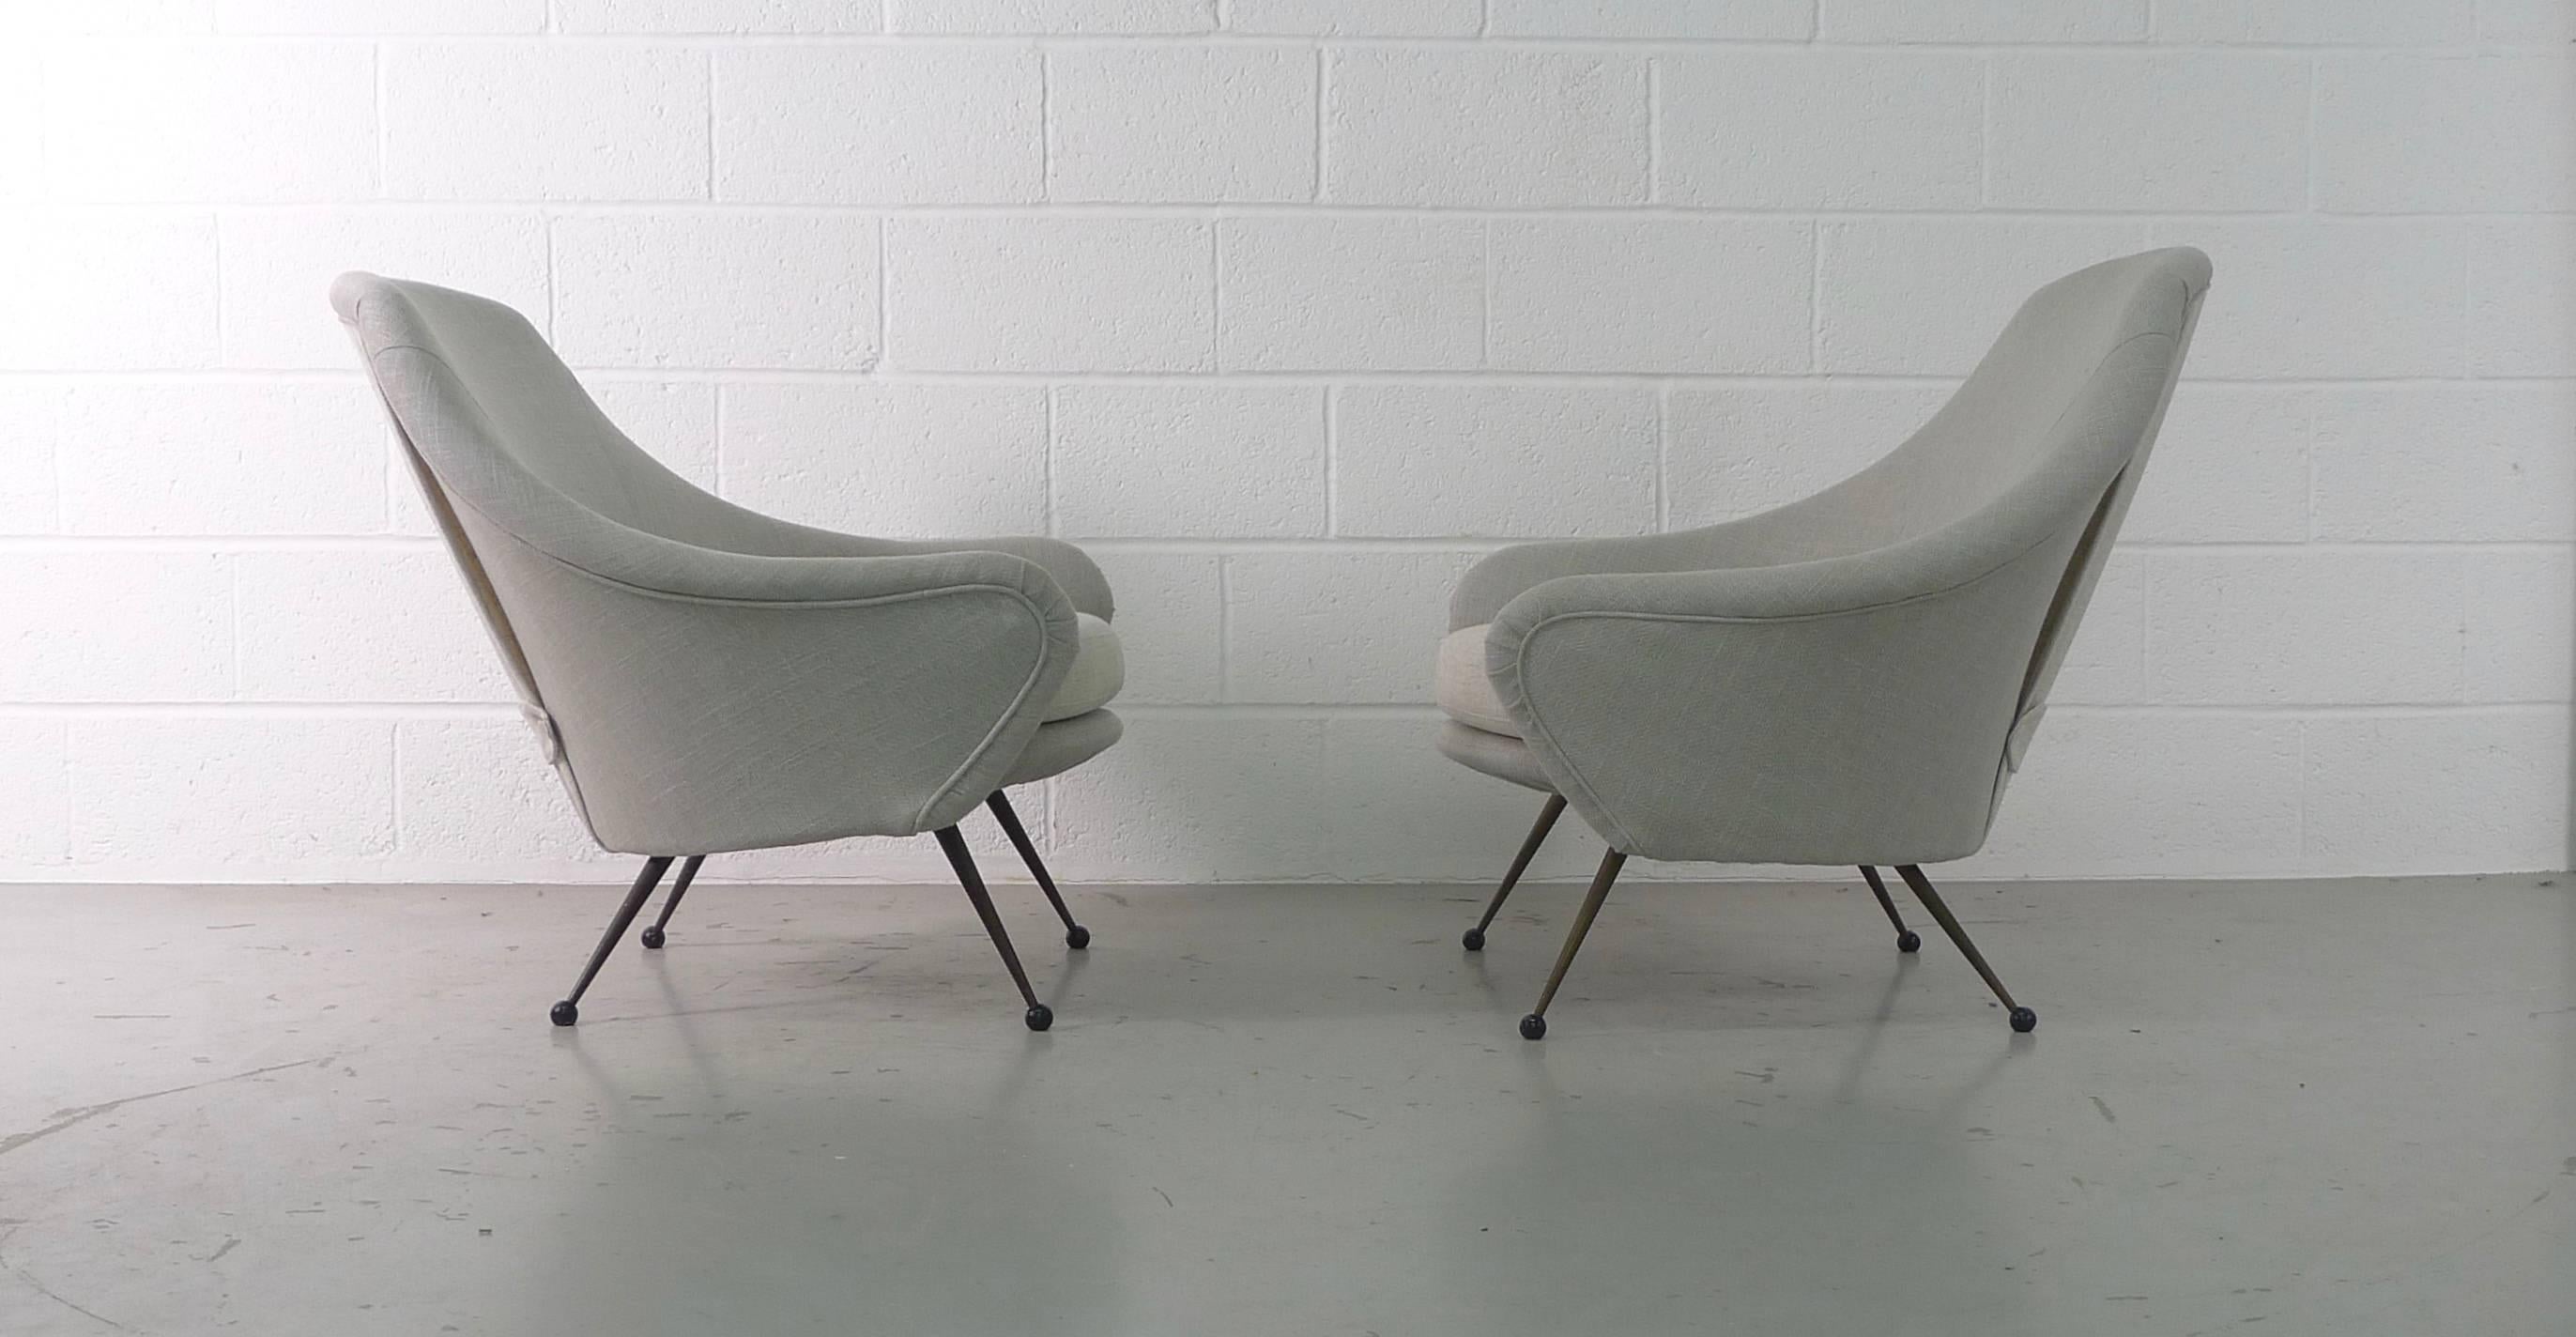 Marco Zanuso for Arflex, Italy, 1954. A pair of Martingala armchairs, fully refurbished after being stripped back to the framework , new soft grey linen upholstery with contrasting cream seats and curtain backs.

Priced for the pair.